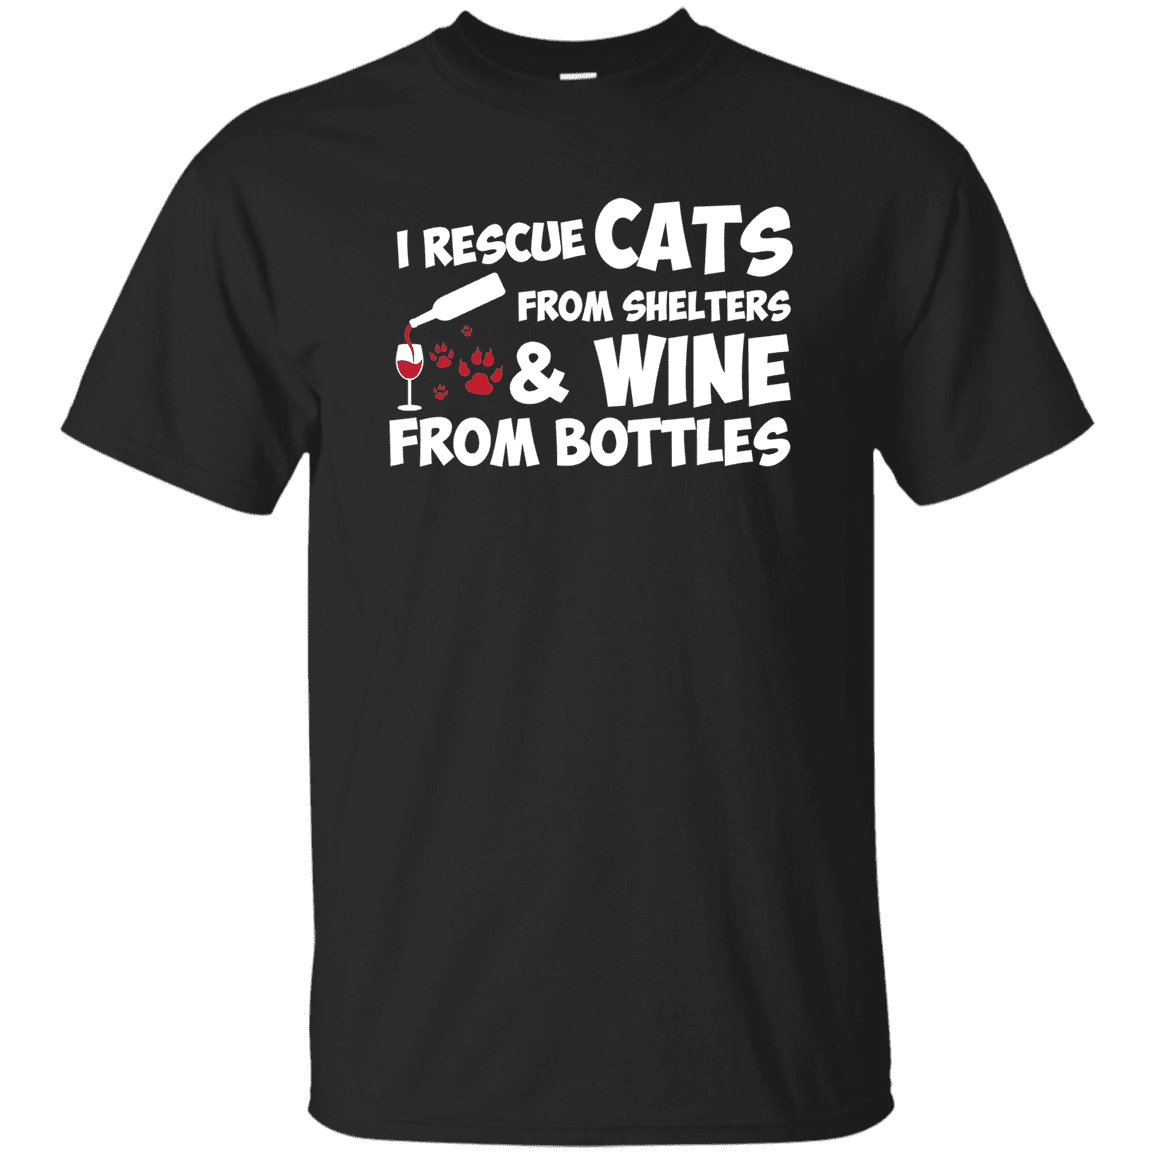 I Rescue Cats And Wine - T Shirt.